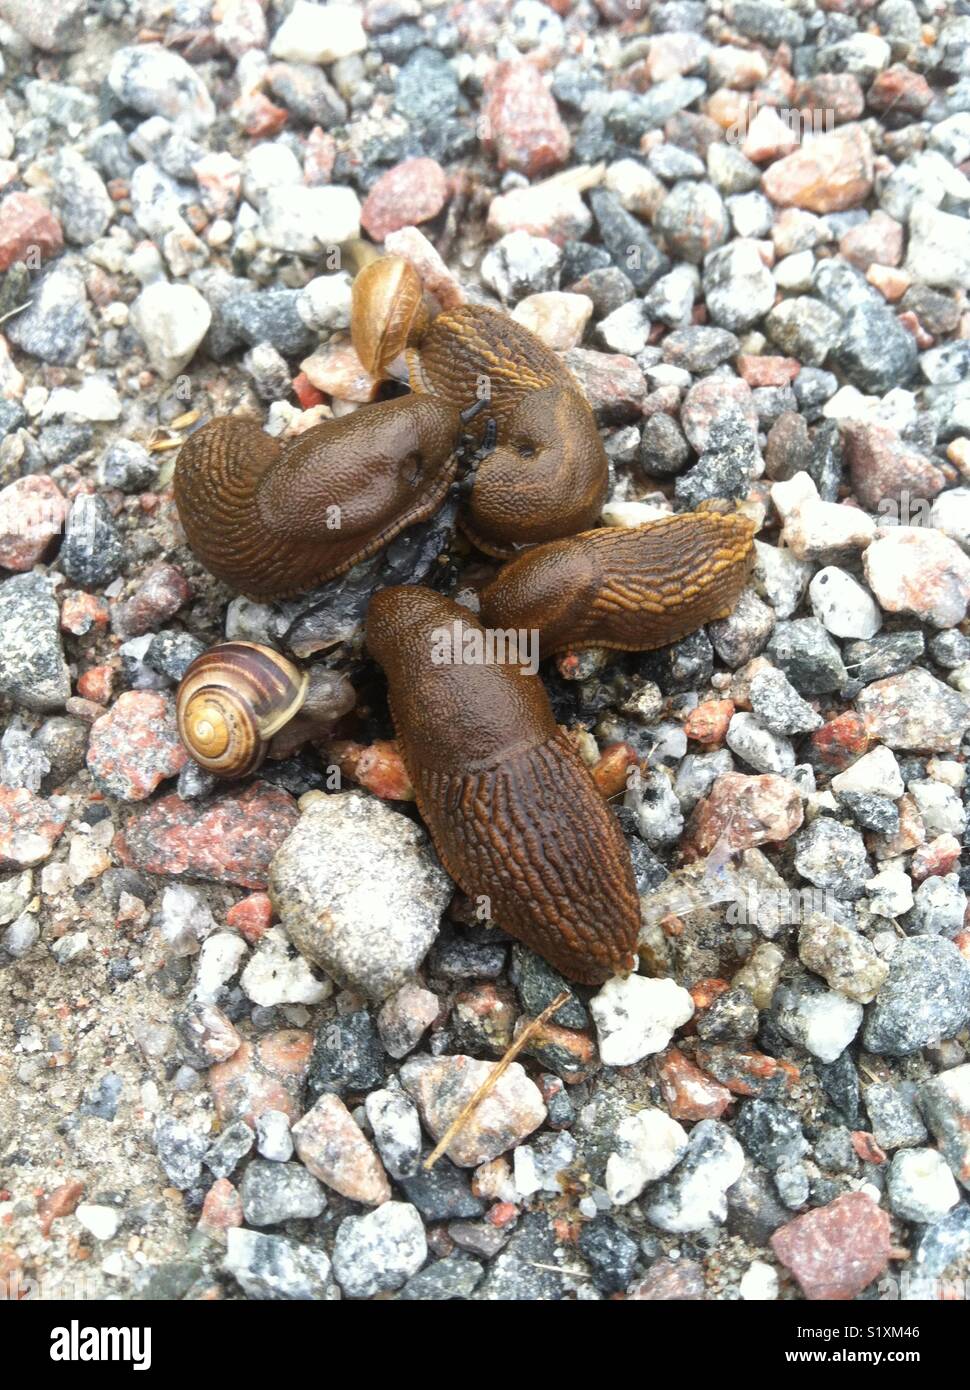 Four large snails without shells and smaller ones on gravel Stock Photo